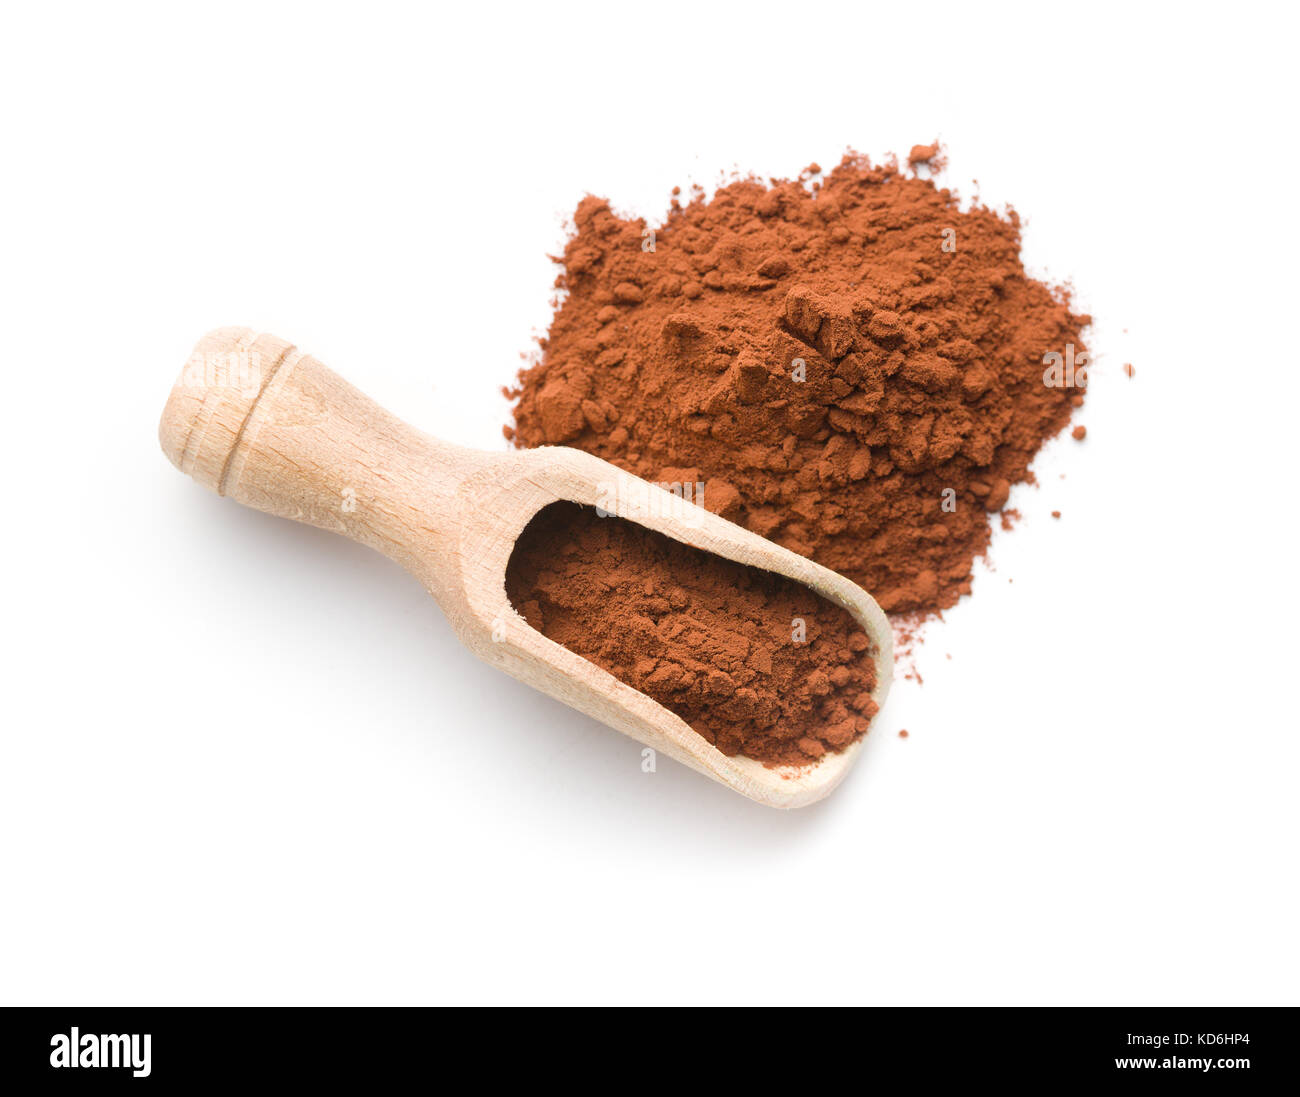 Dark cocoa powder in wooden scoop isolated on white background. Stock Photo